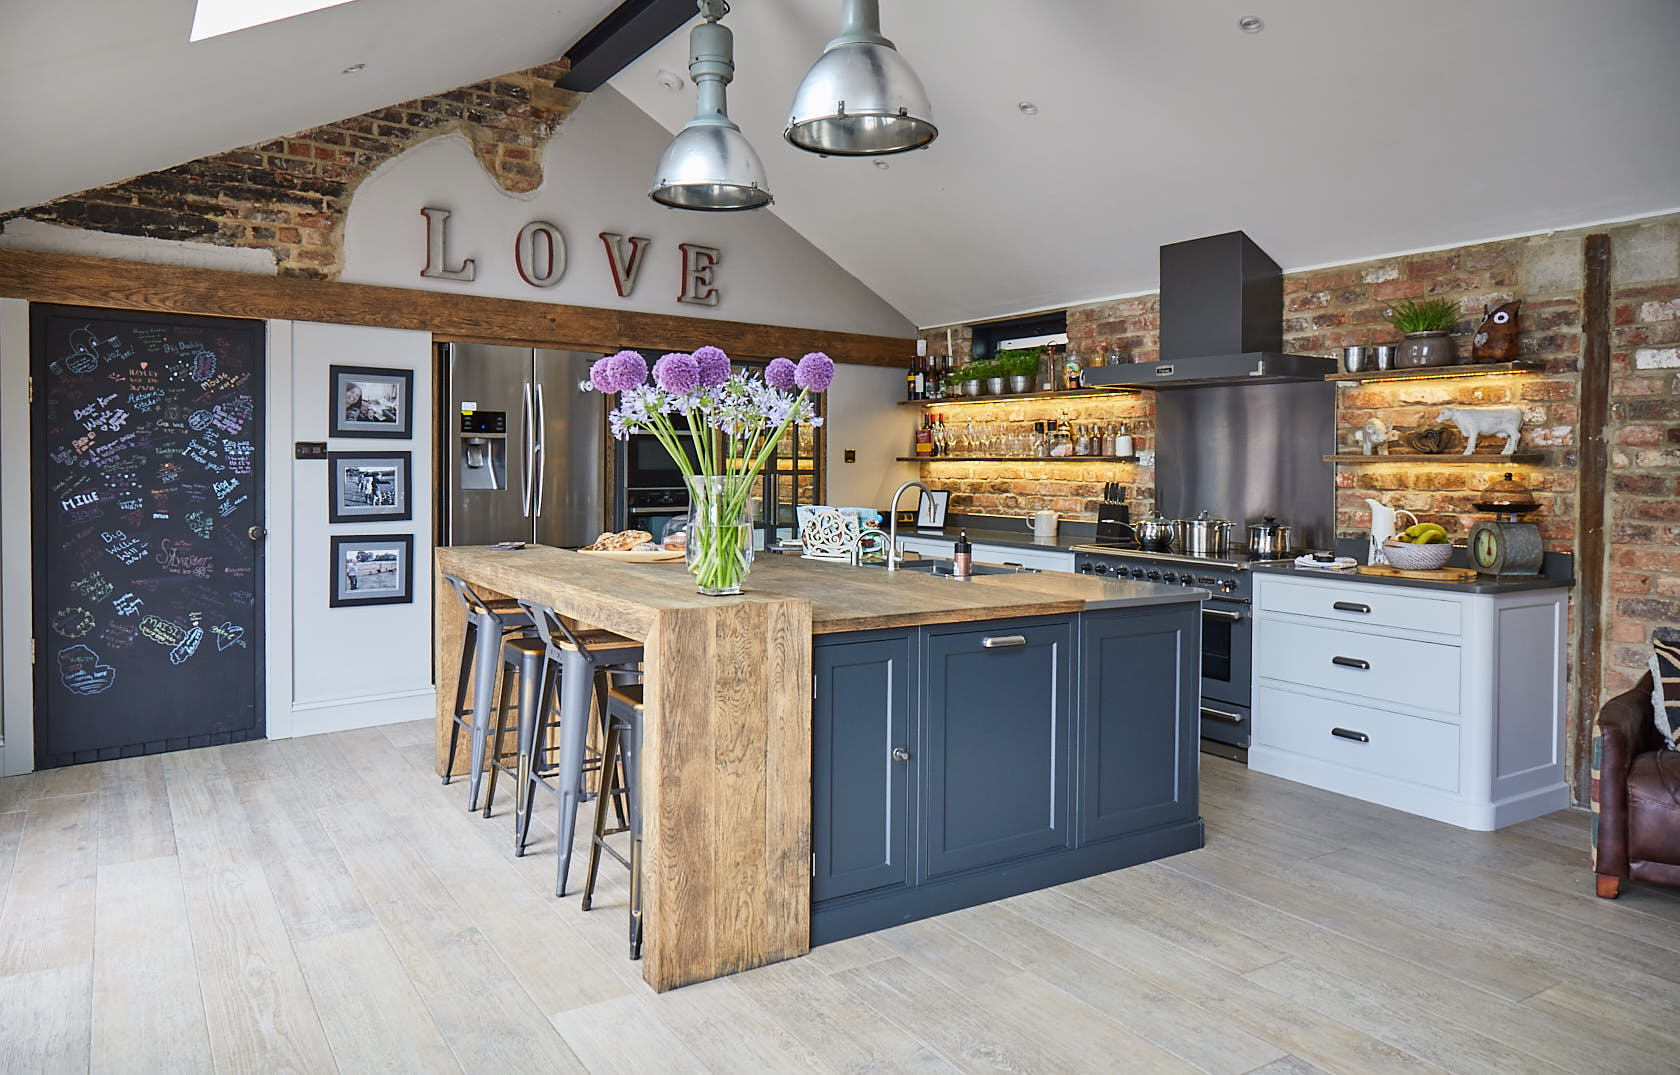 Flowers sit on large bespoke kitchen island with rustic oak breakfast bar and lamp black painted cabinets